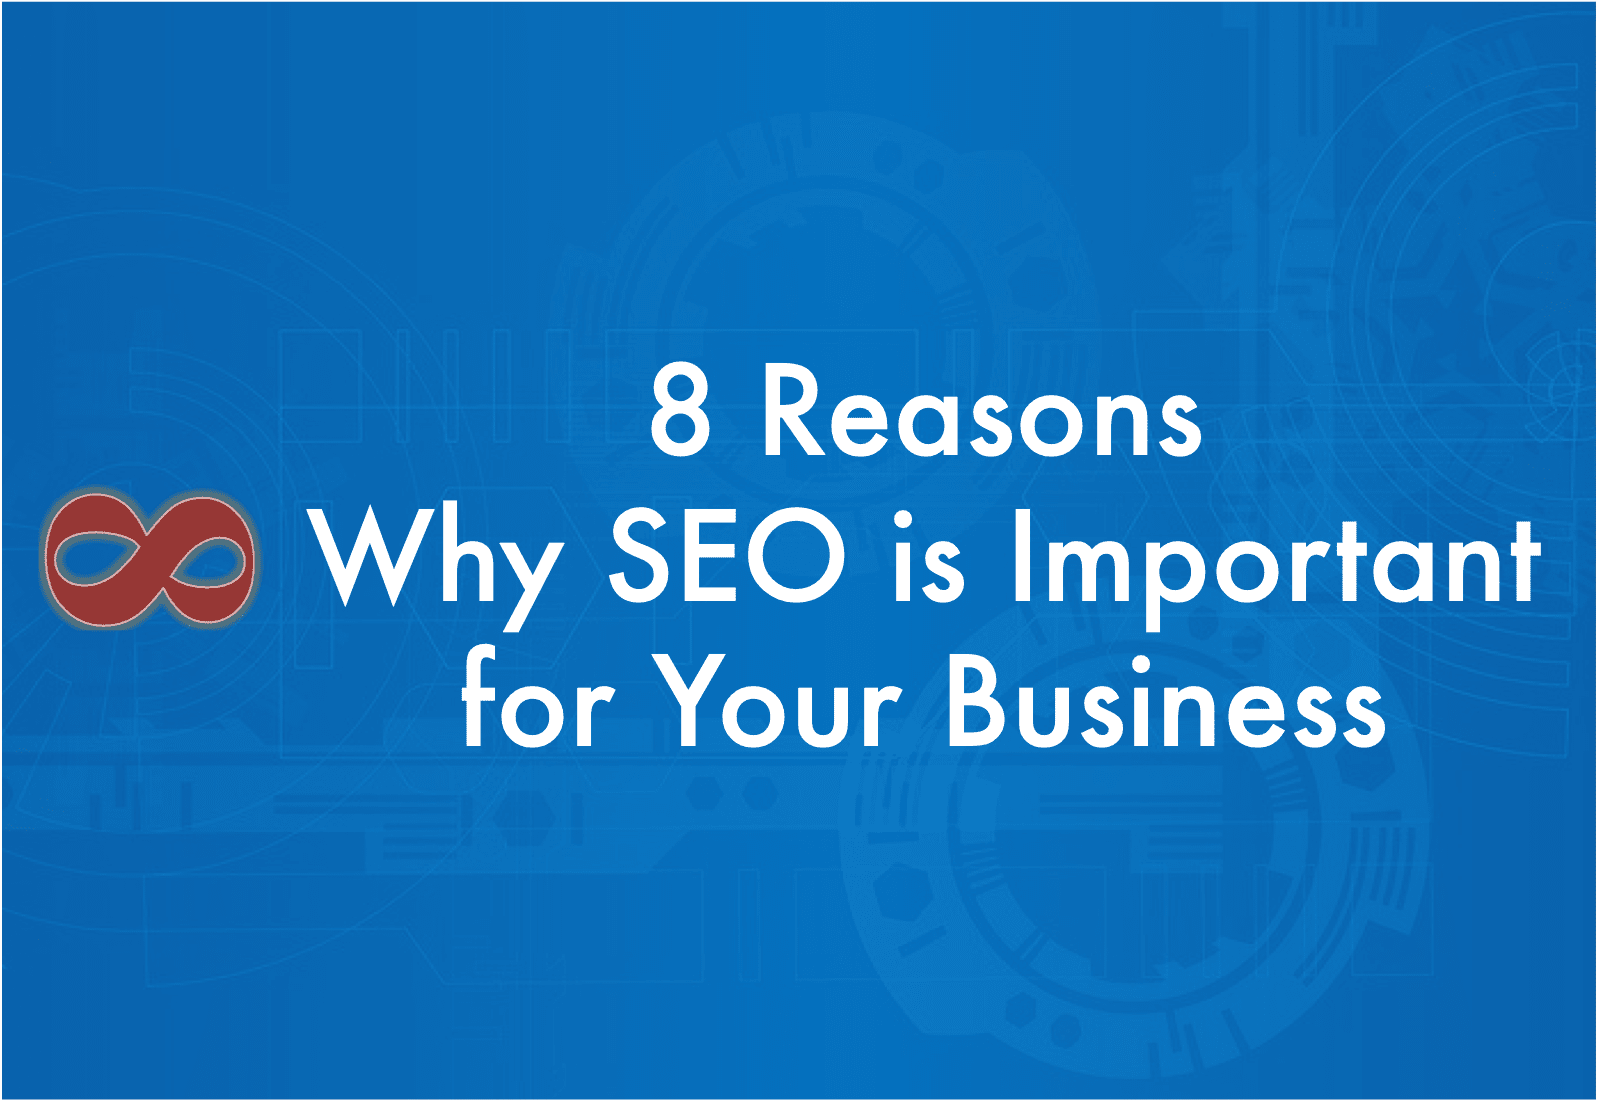 Link to the Article with the Title 8 Reasons Why SEO is Important for Your Business from I2